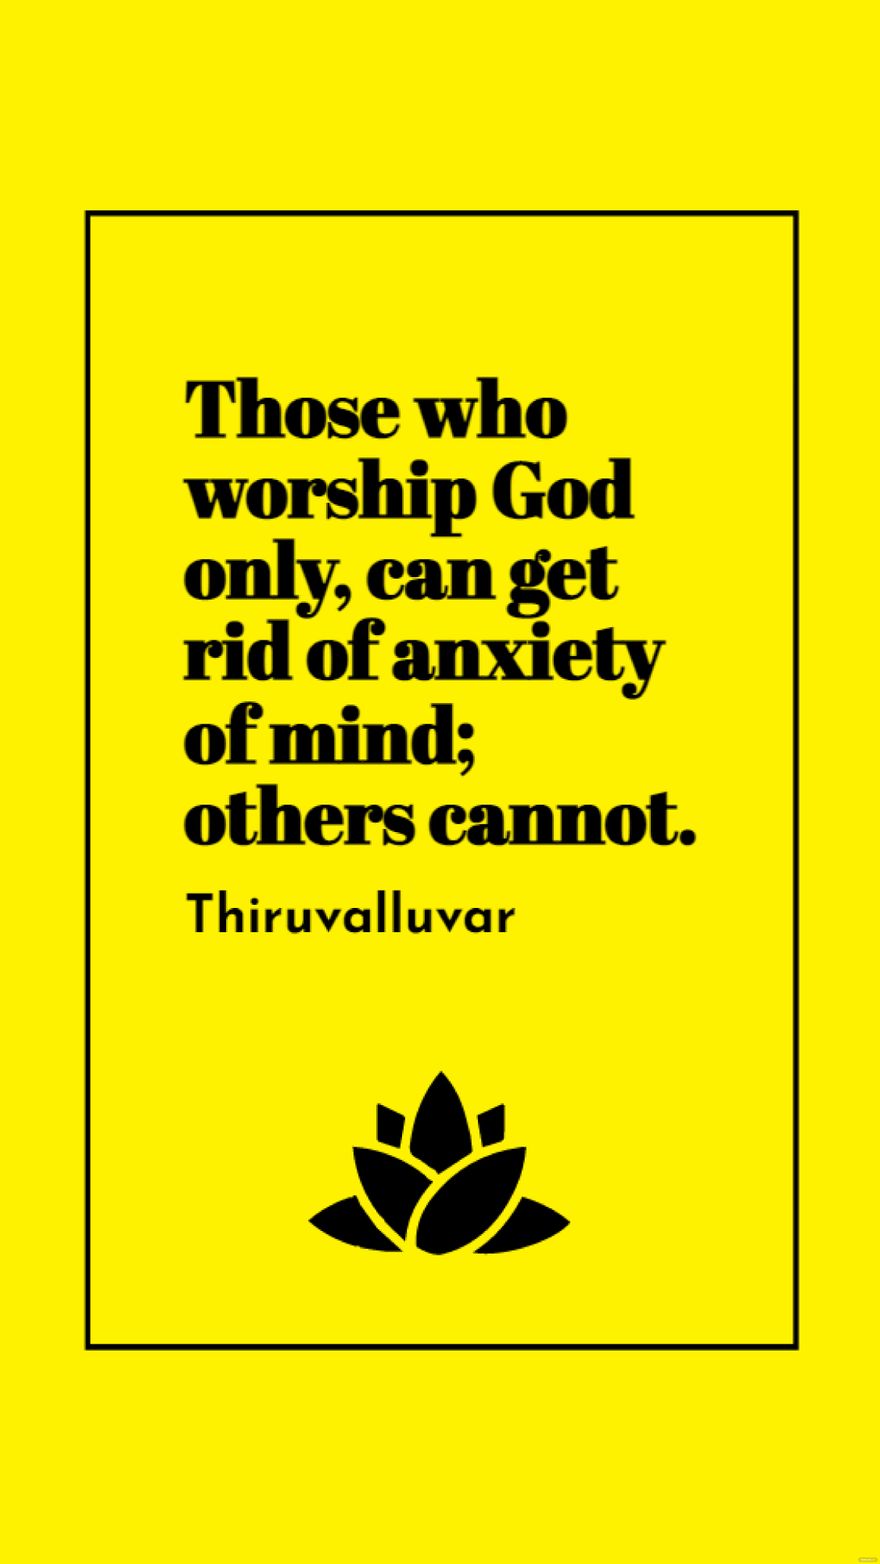 Thiruvalluvar - Those who worship God only, can get rid of anxiety of mind; others cannot. in JPG